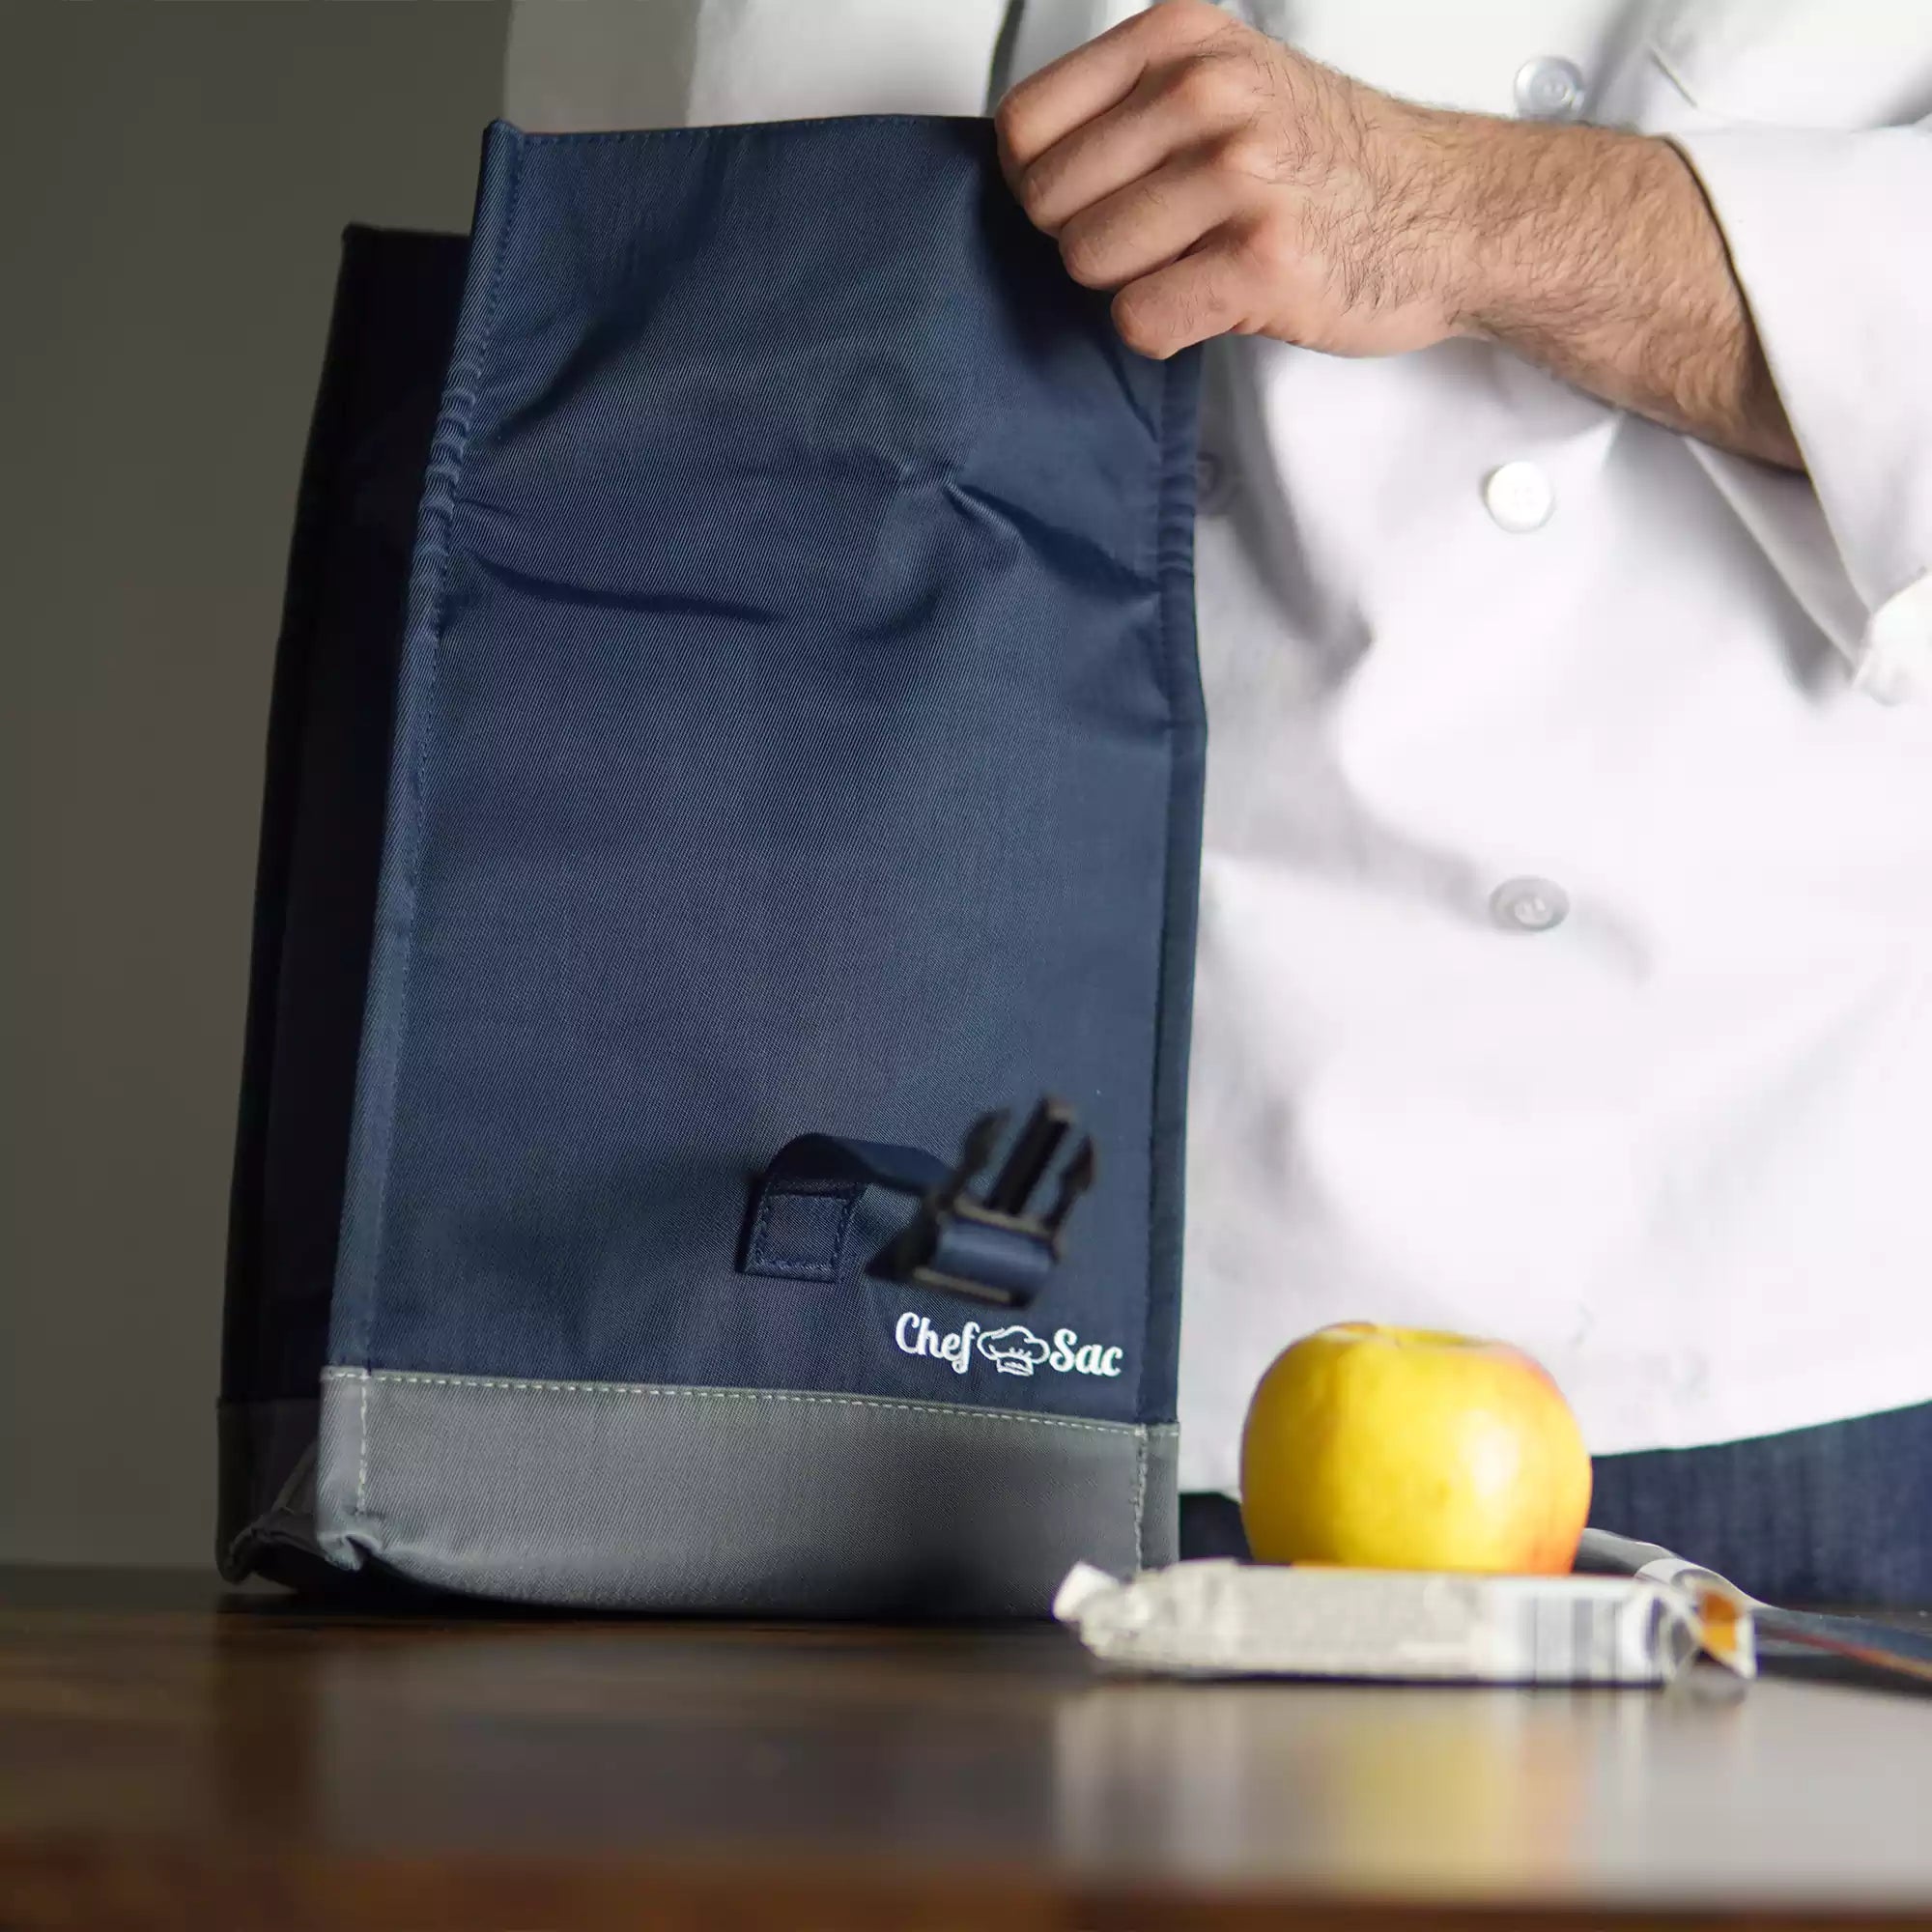 Rolled-up lunch bag